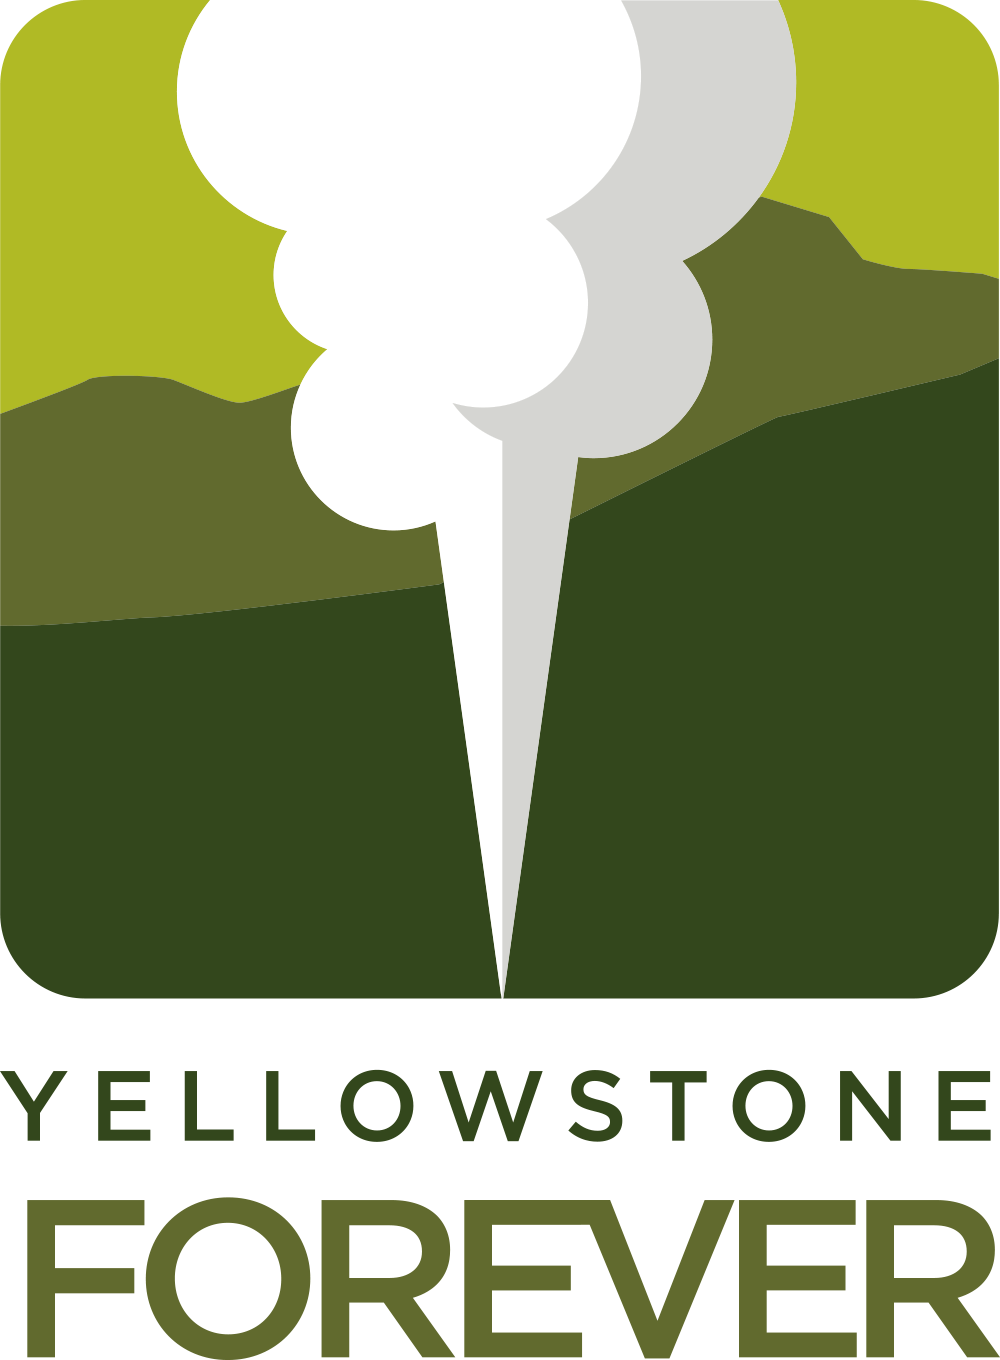 Yellowstone Falls clipart #13, Download drawings